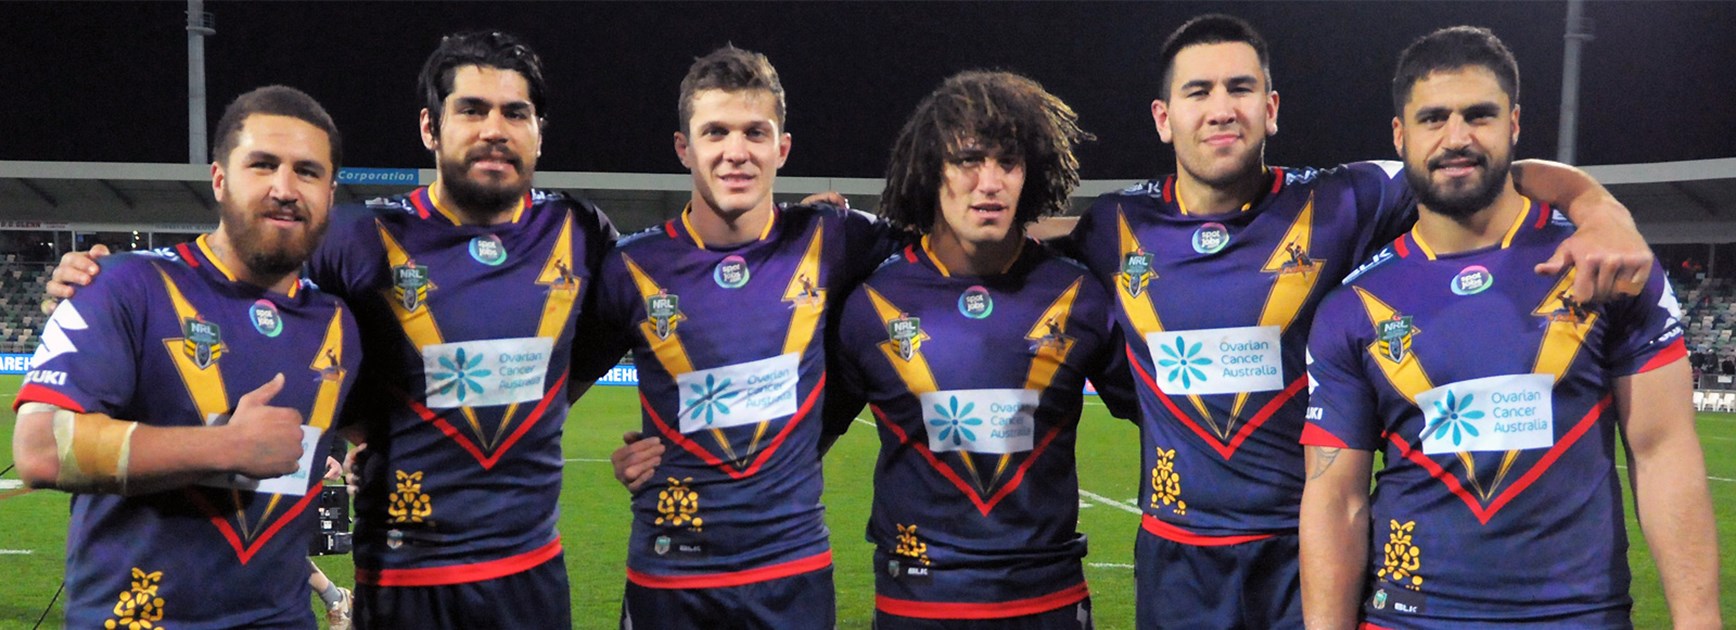 Melbourne's New Zealand players following the Storm's win over the Dragons at Napier, New Zealand.